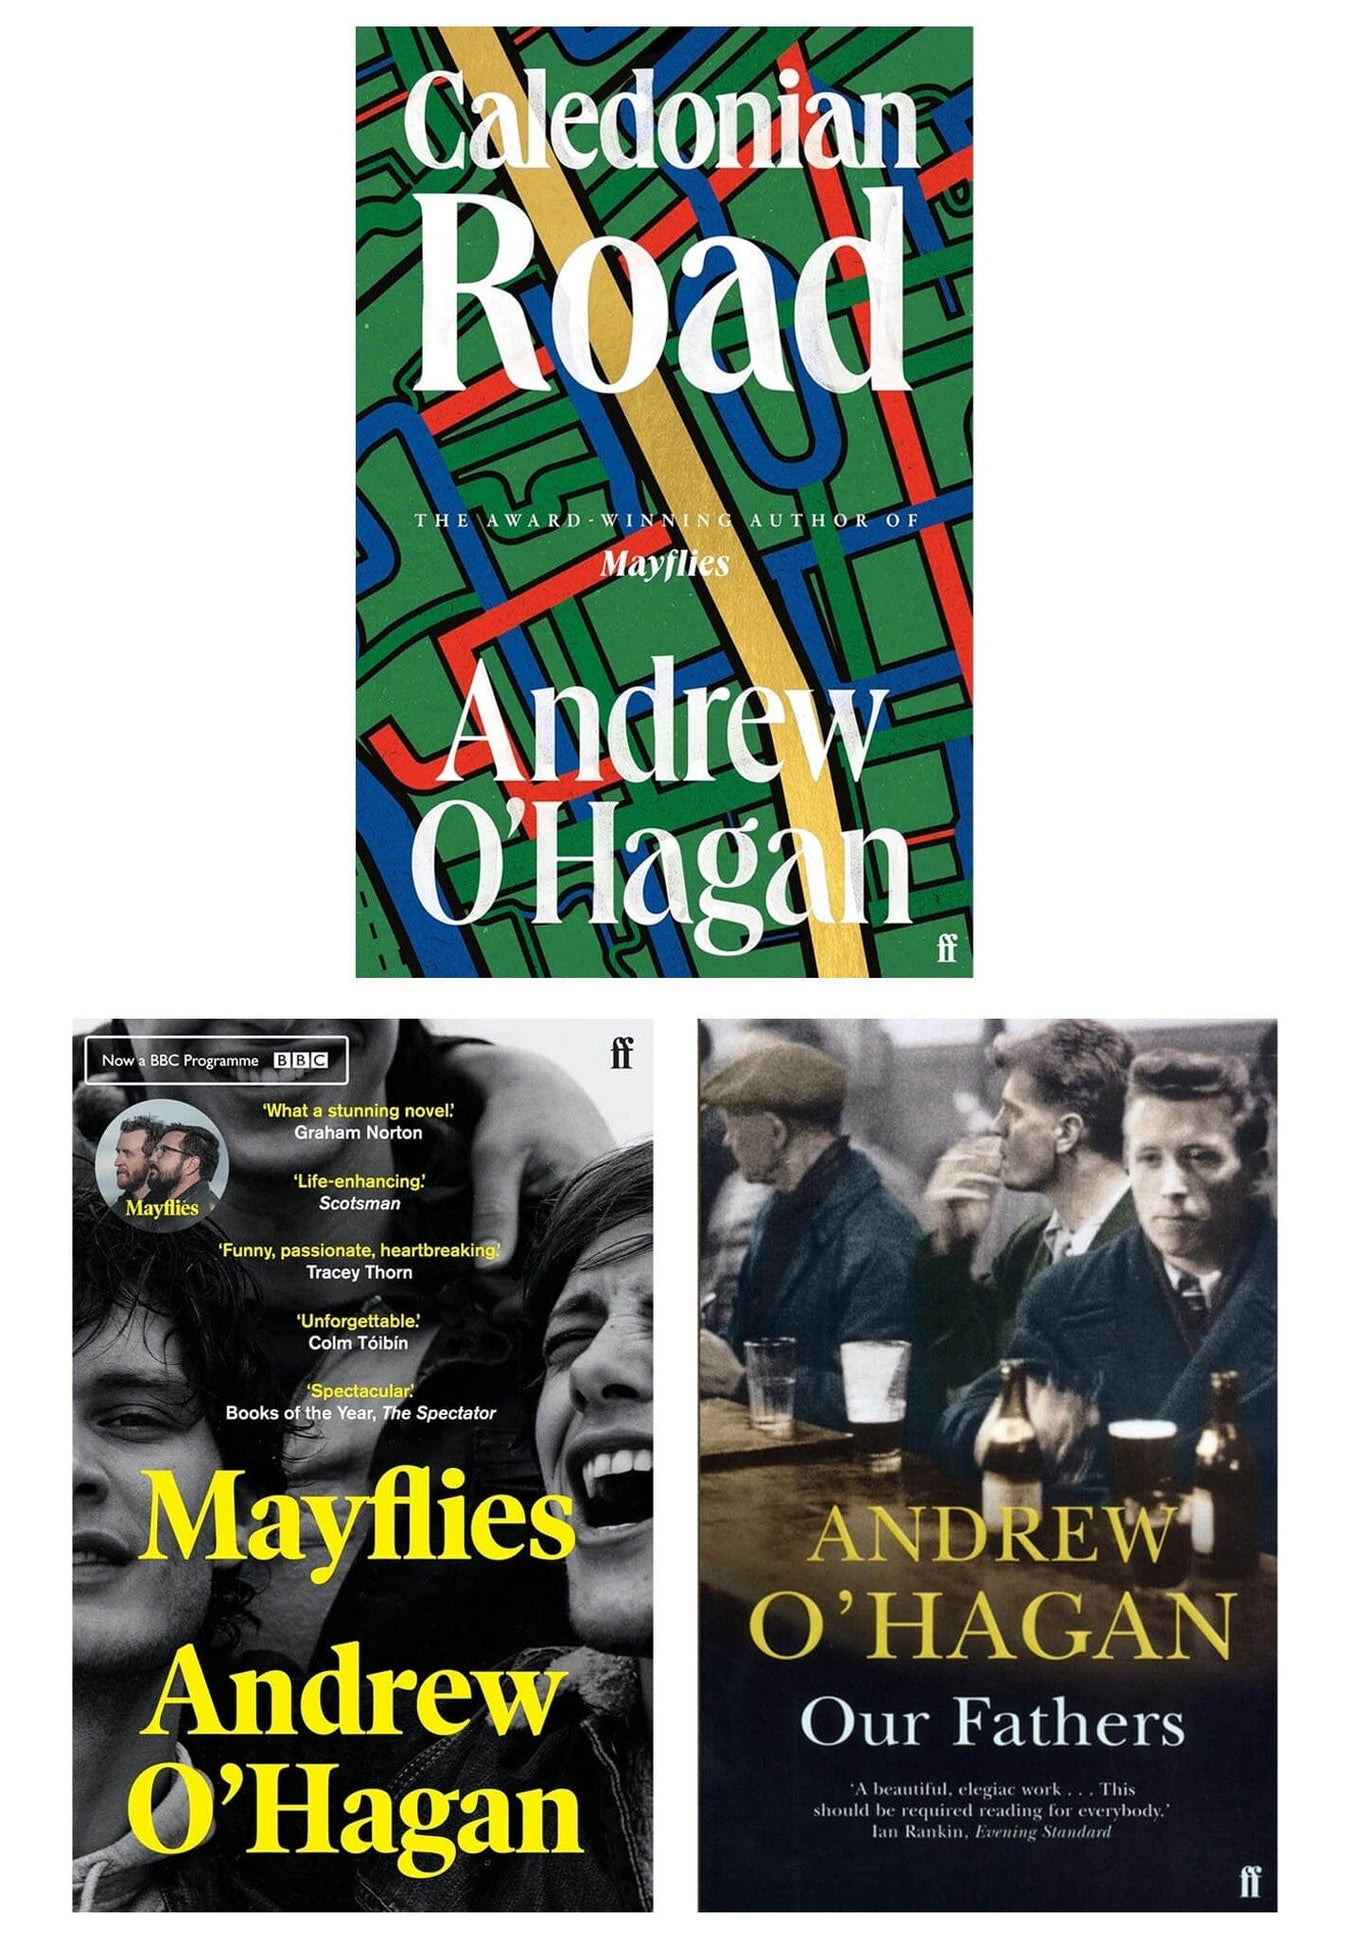 Andrew O'Hagan's Our Fathers, Mayflies & Caledonian Road 3 Books Collection Set - Fiction - Paperback/Hardback Fiction Faber & Faber